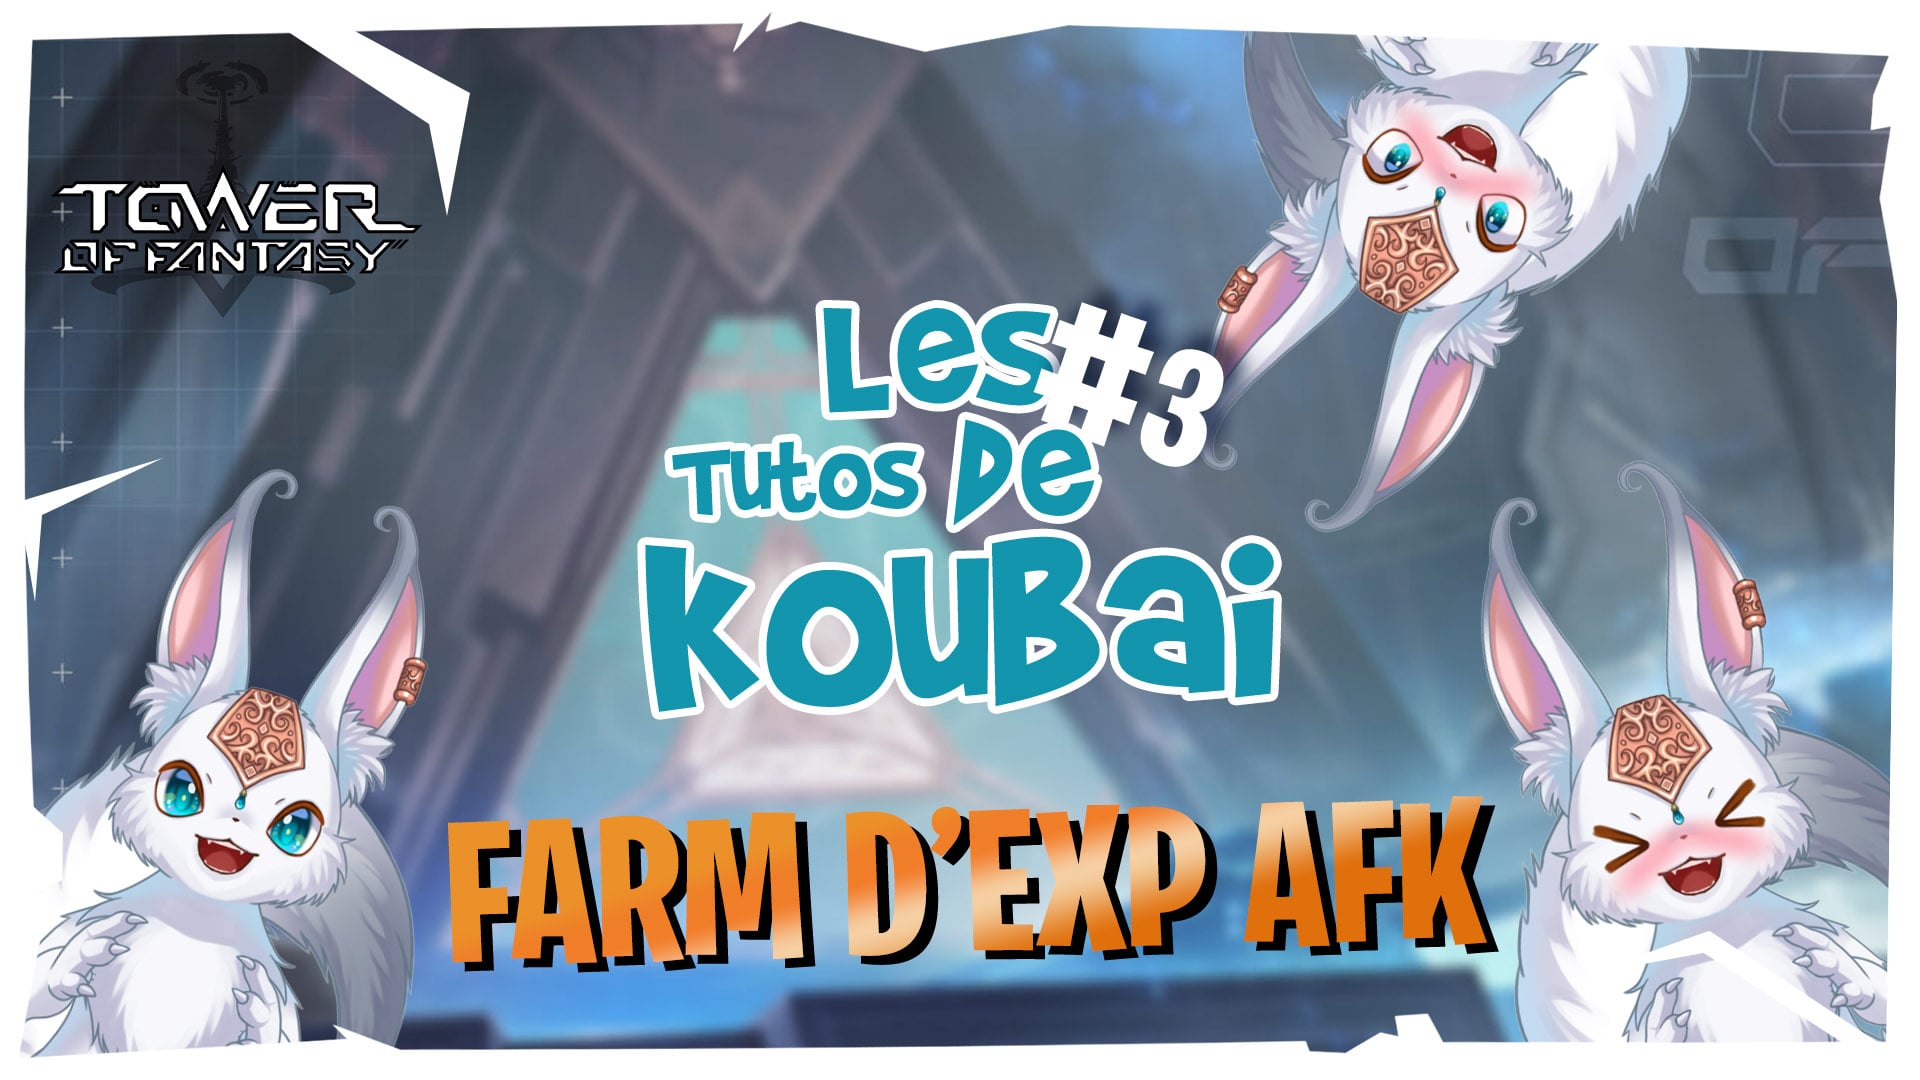 EXP RAPIDE & AFK – Tower of Fantasy